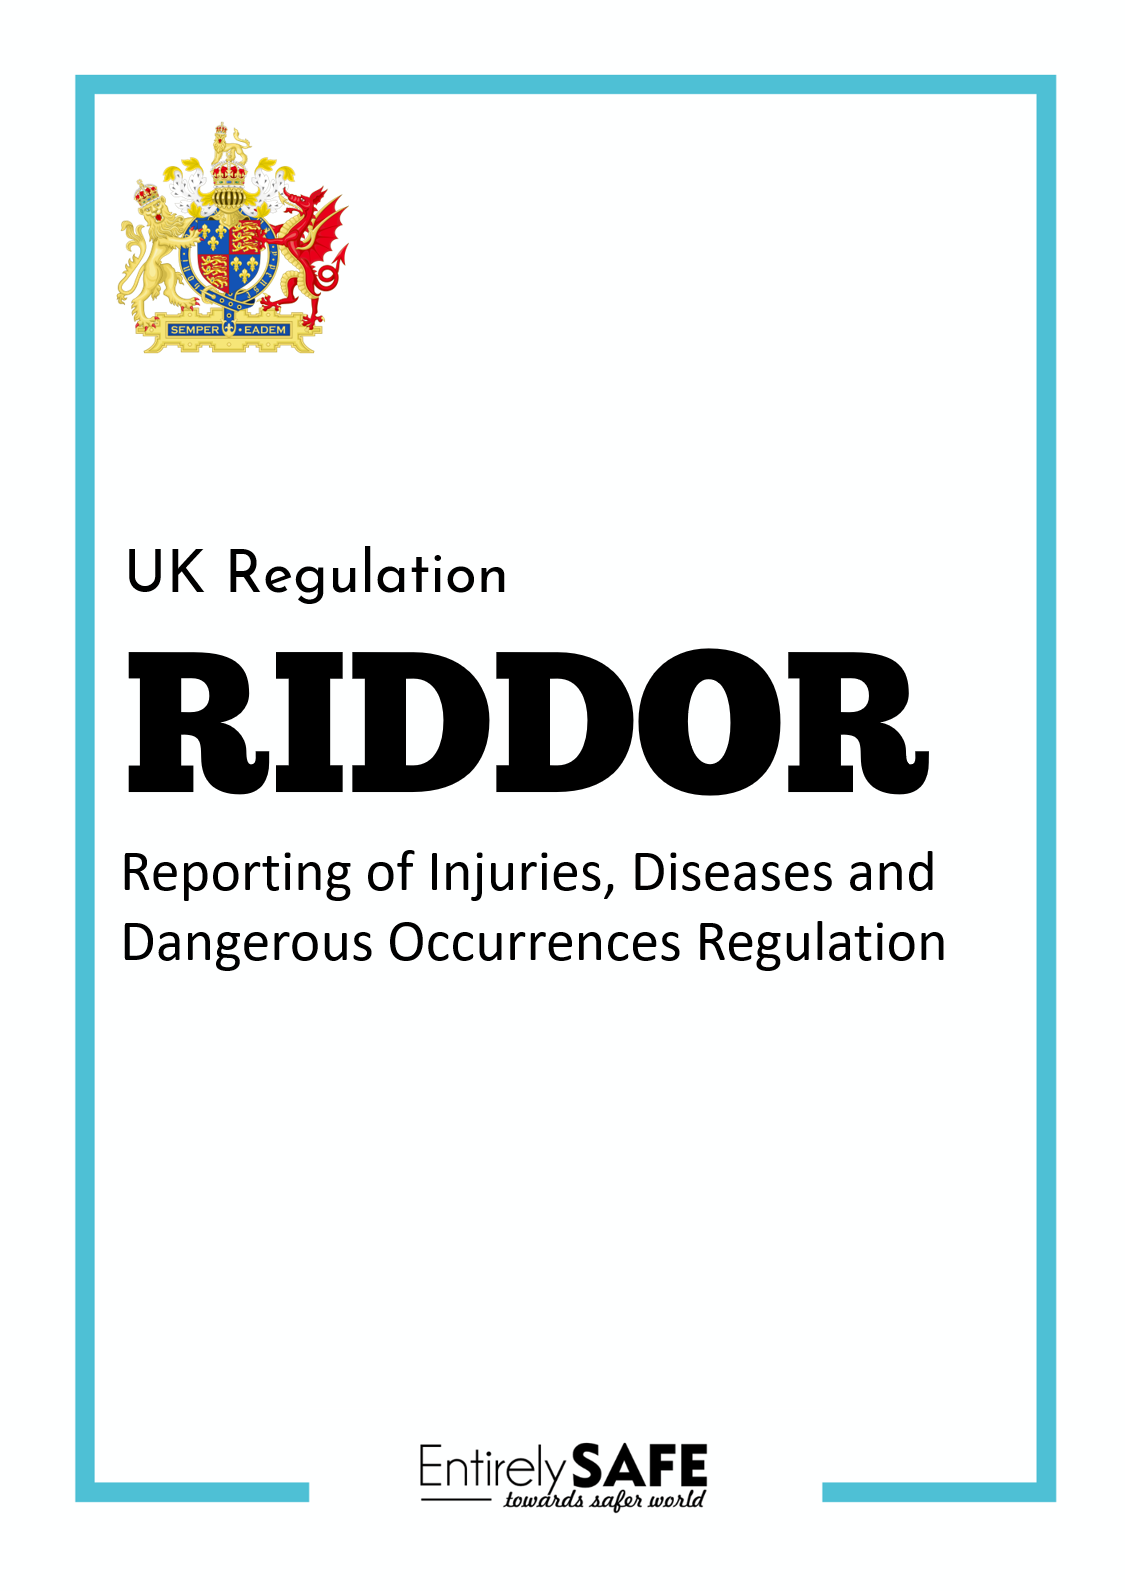 167-Reporting of Injuries, Diseases and Dangerous Occurrences Regulations - RIDDOR